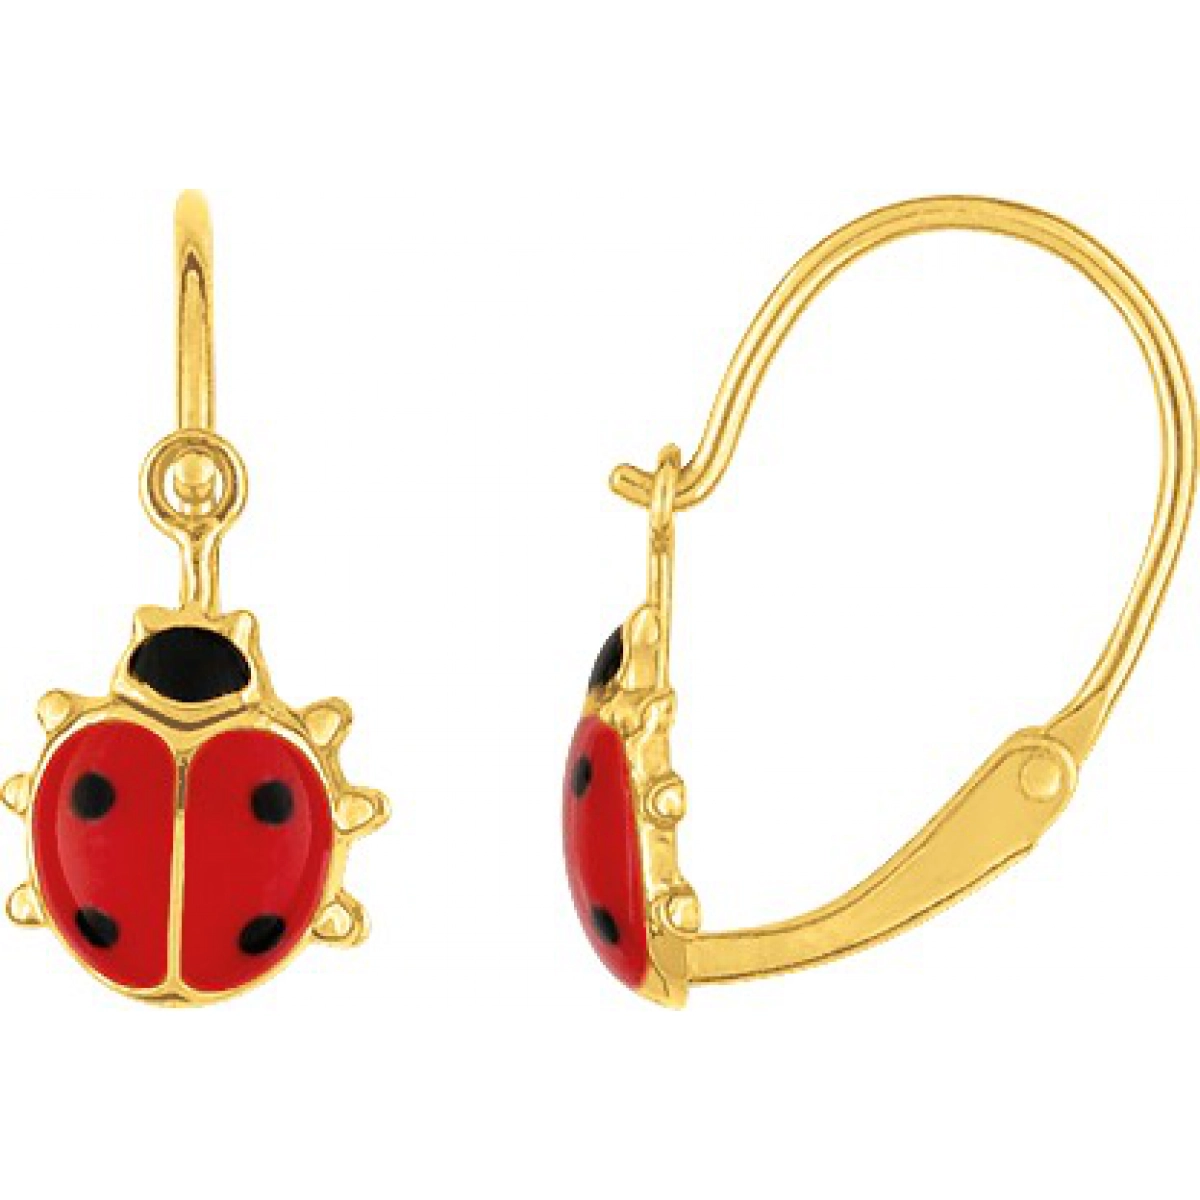 Earrings pair 'ladybird' red and black lacquered 18K YG  Lua Blanca  BM383JL.0